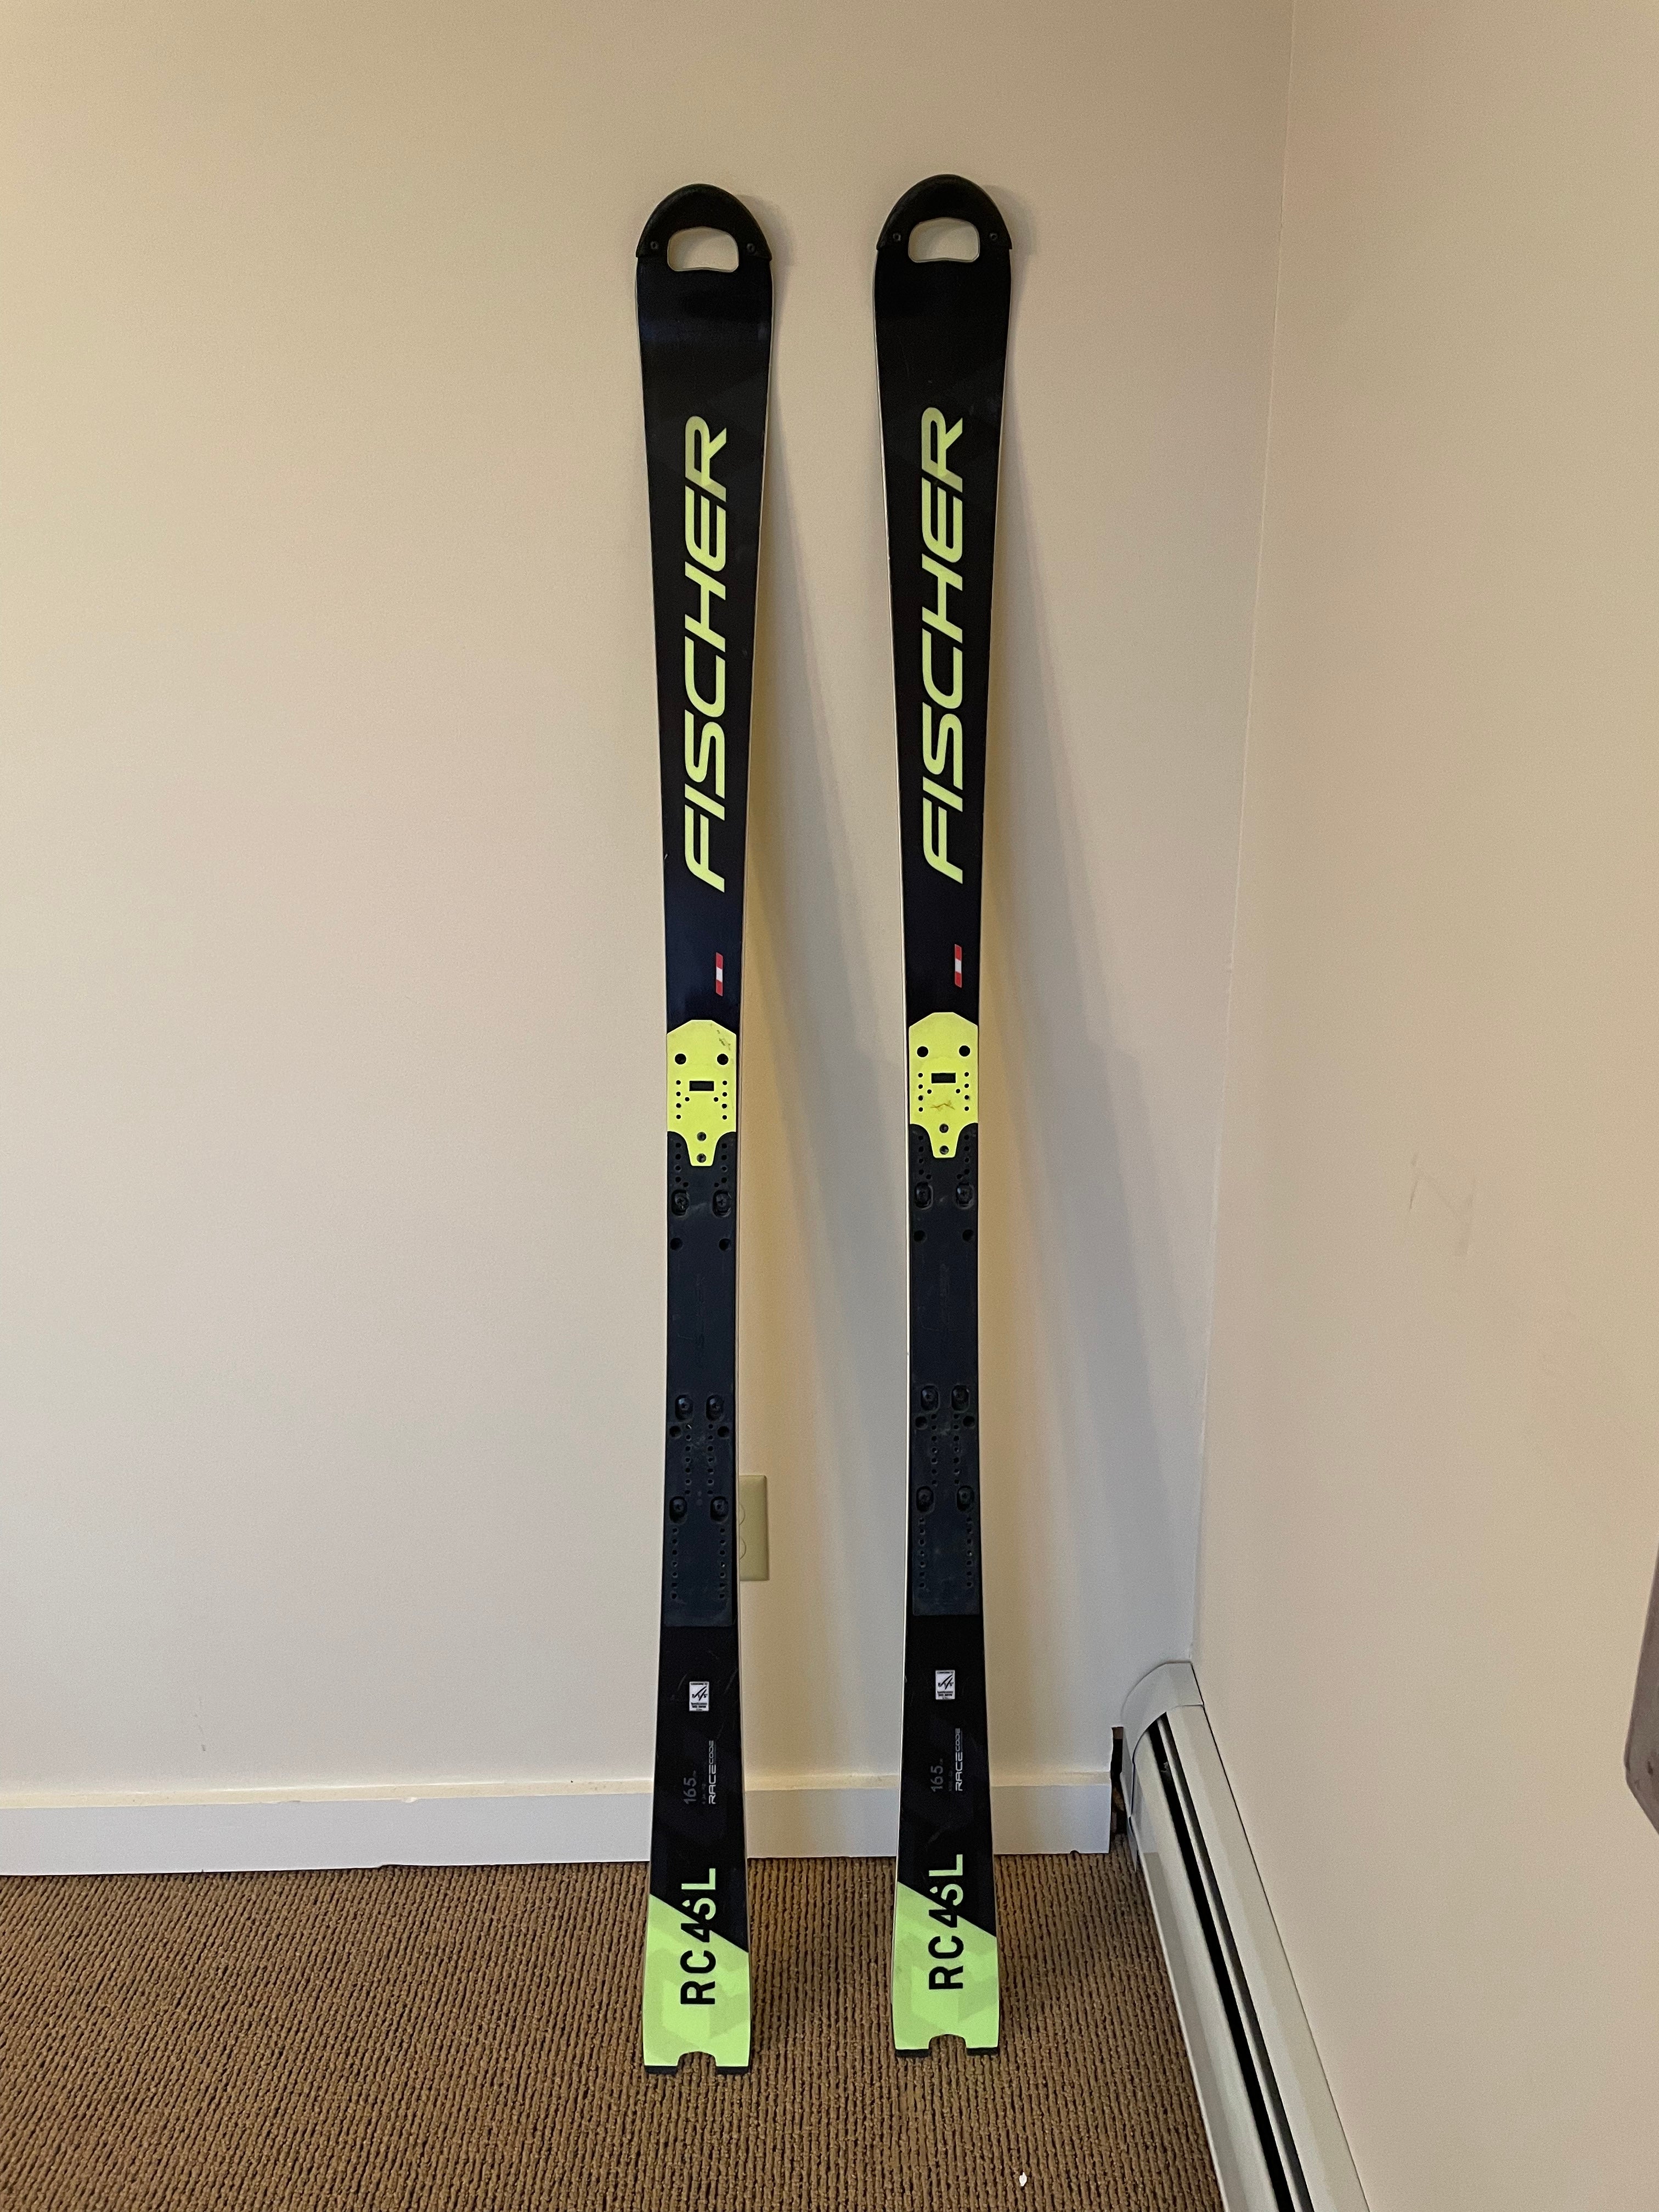 Fischer SL 165cm Without Bindings | SidelineSwap